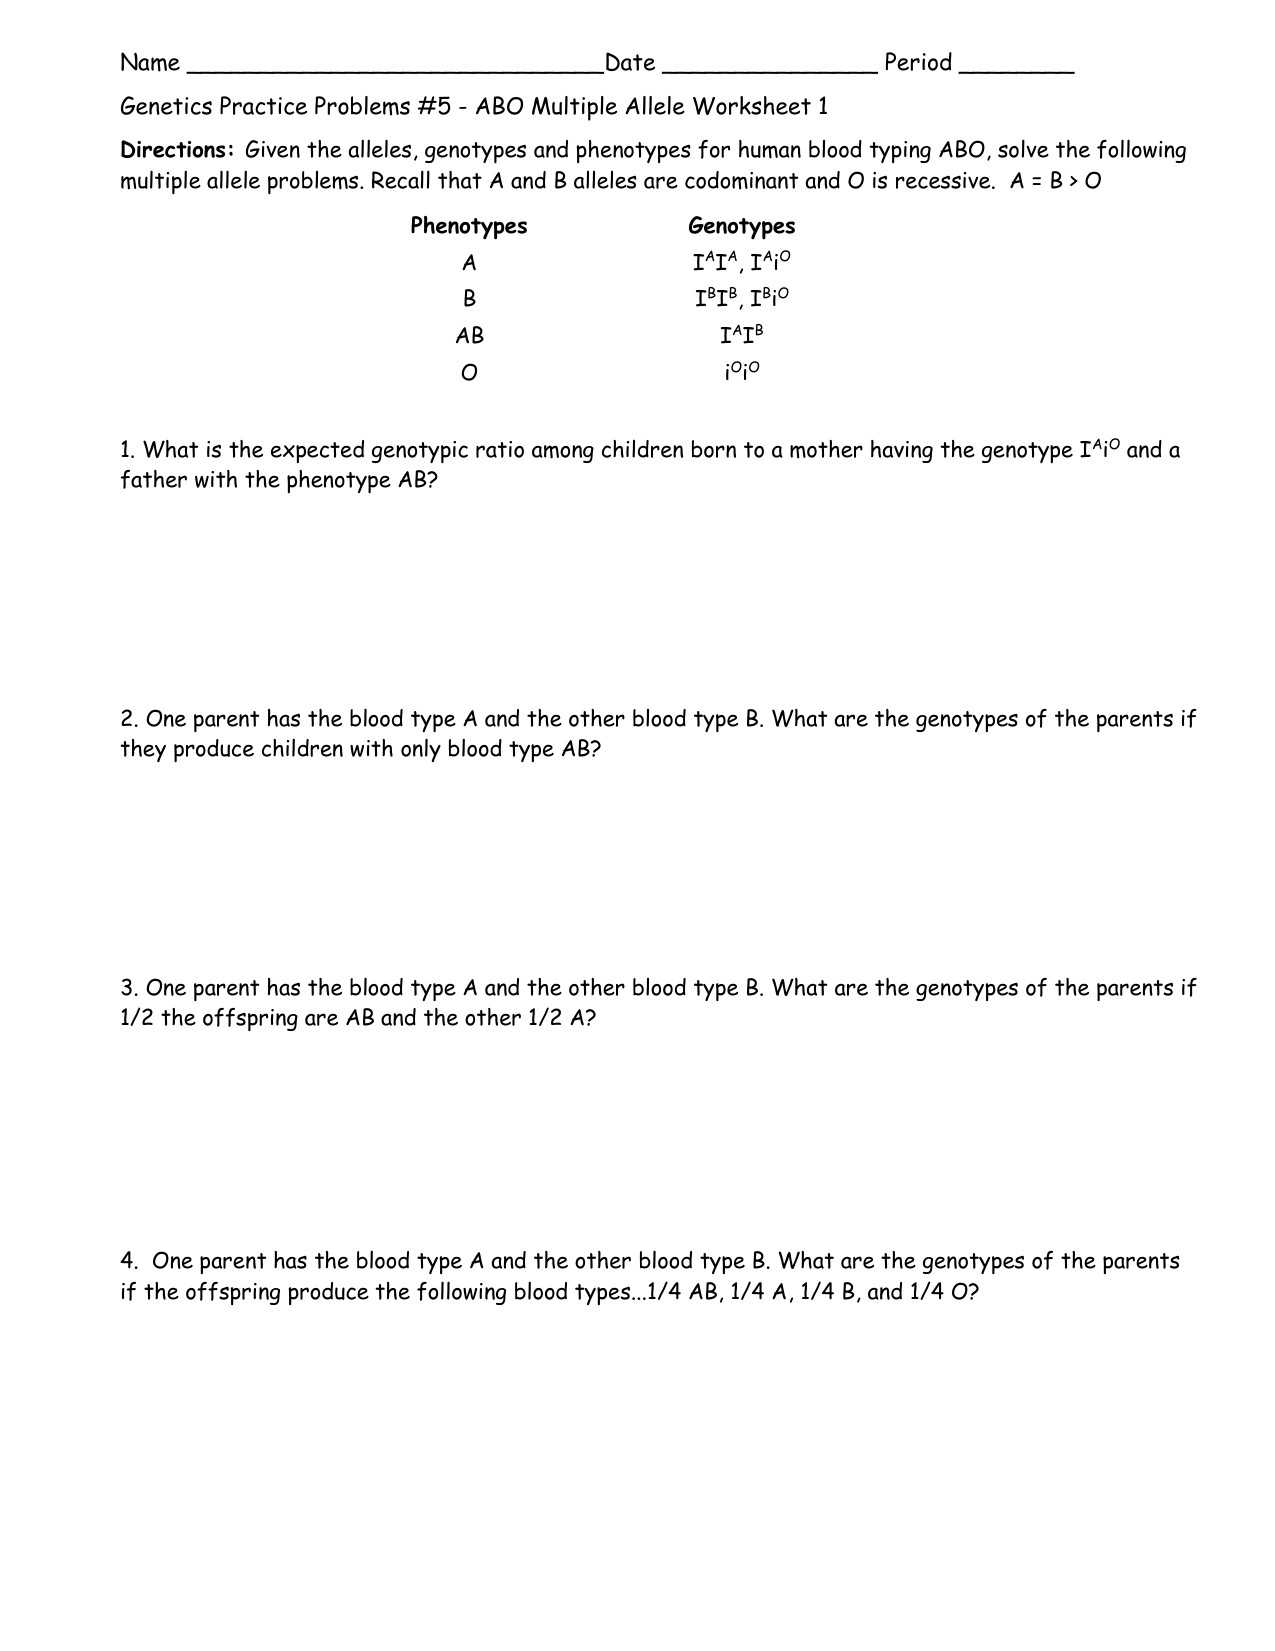 Monohybrid Cross Problems Worksheet with Answers as Well as Genetic Practice Problems Worksheet Answers Image Collections